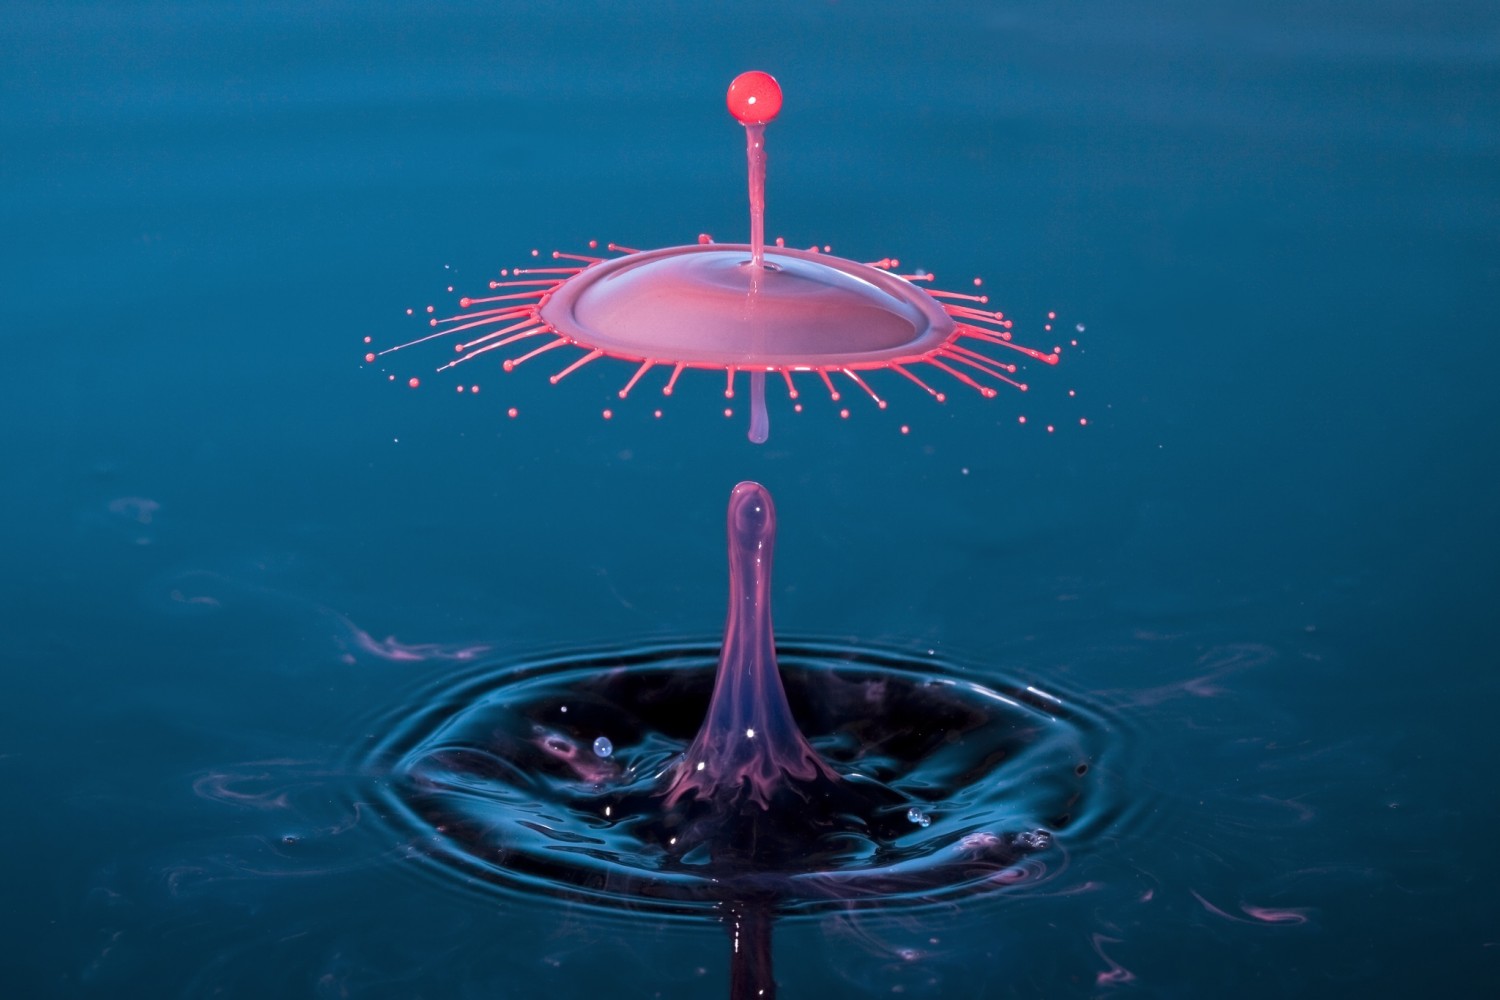 Getting started in water drop photography